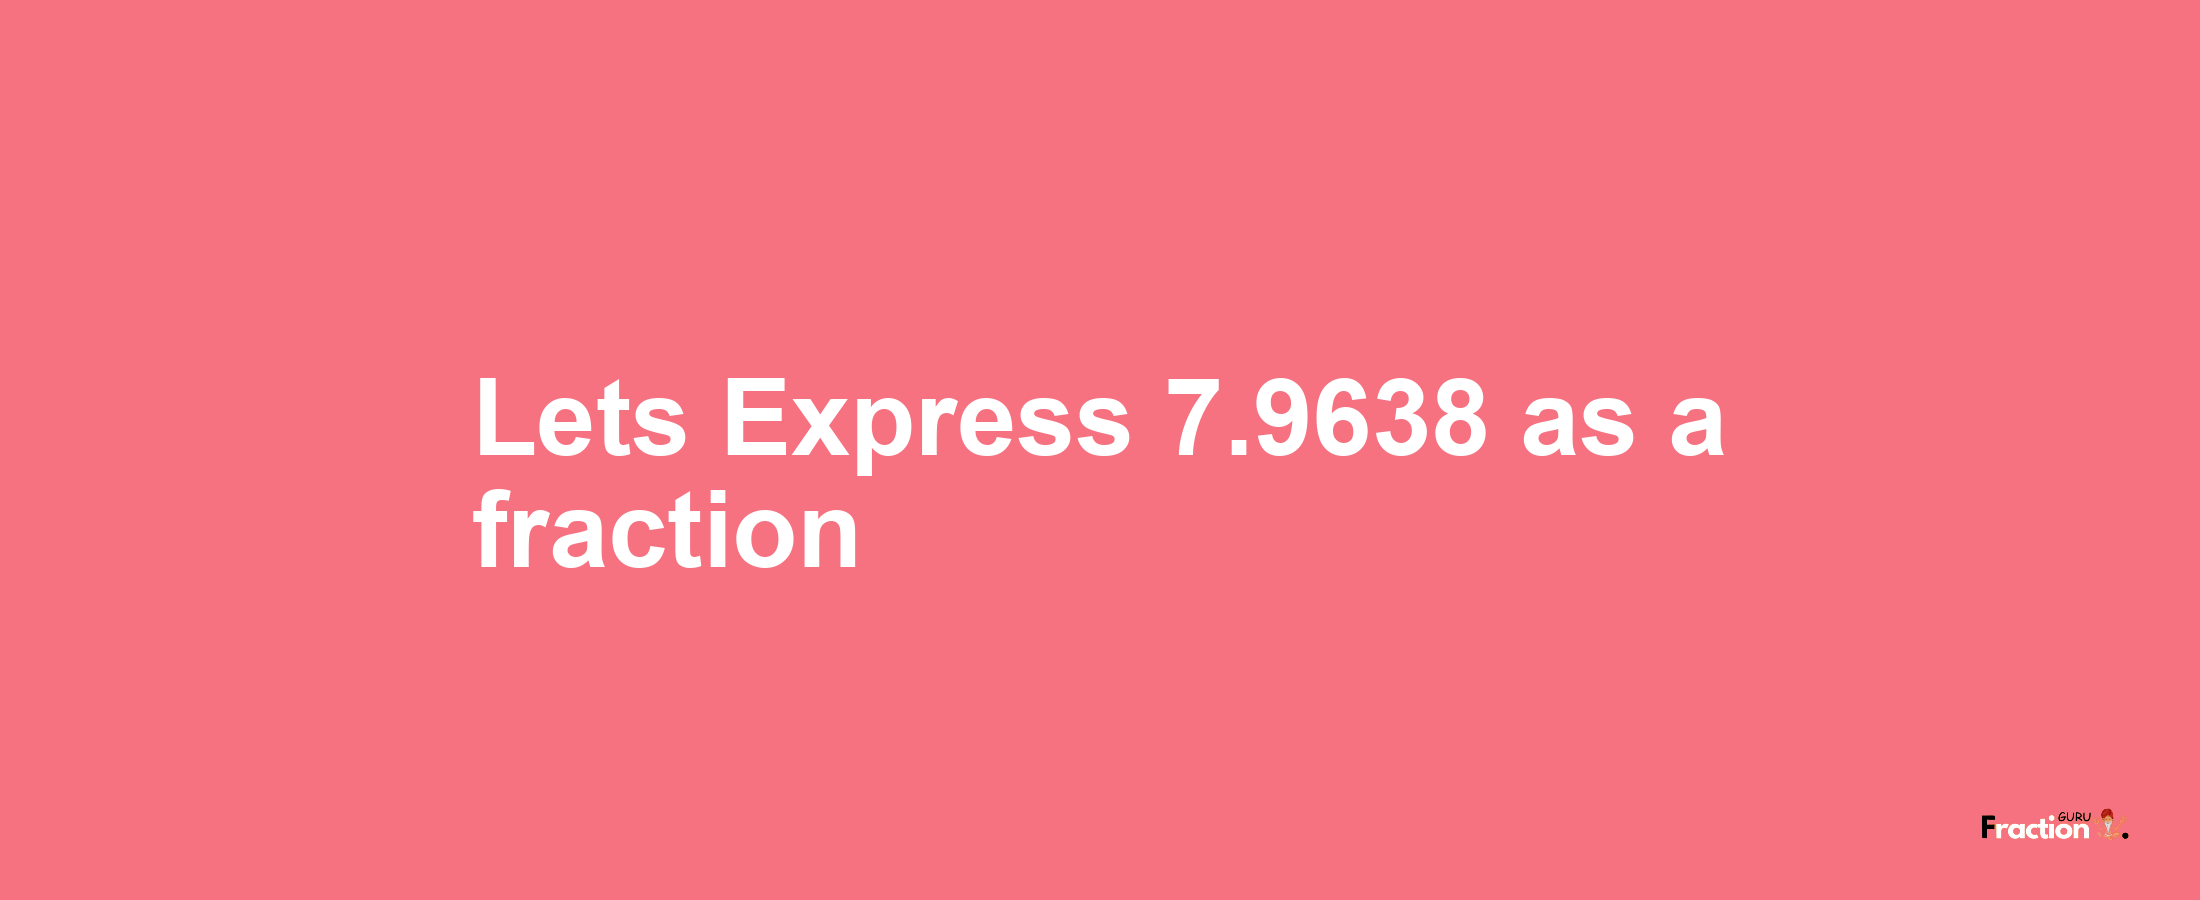 Lets Express 7.9638 as afraction